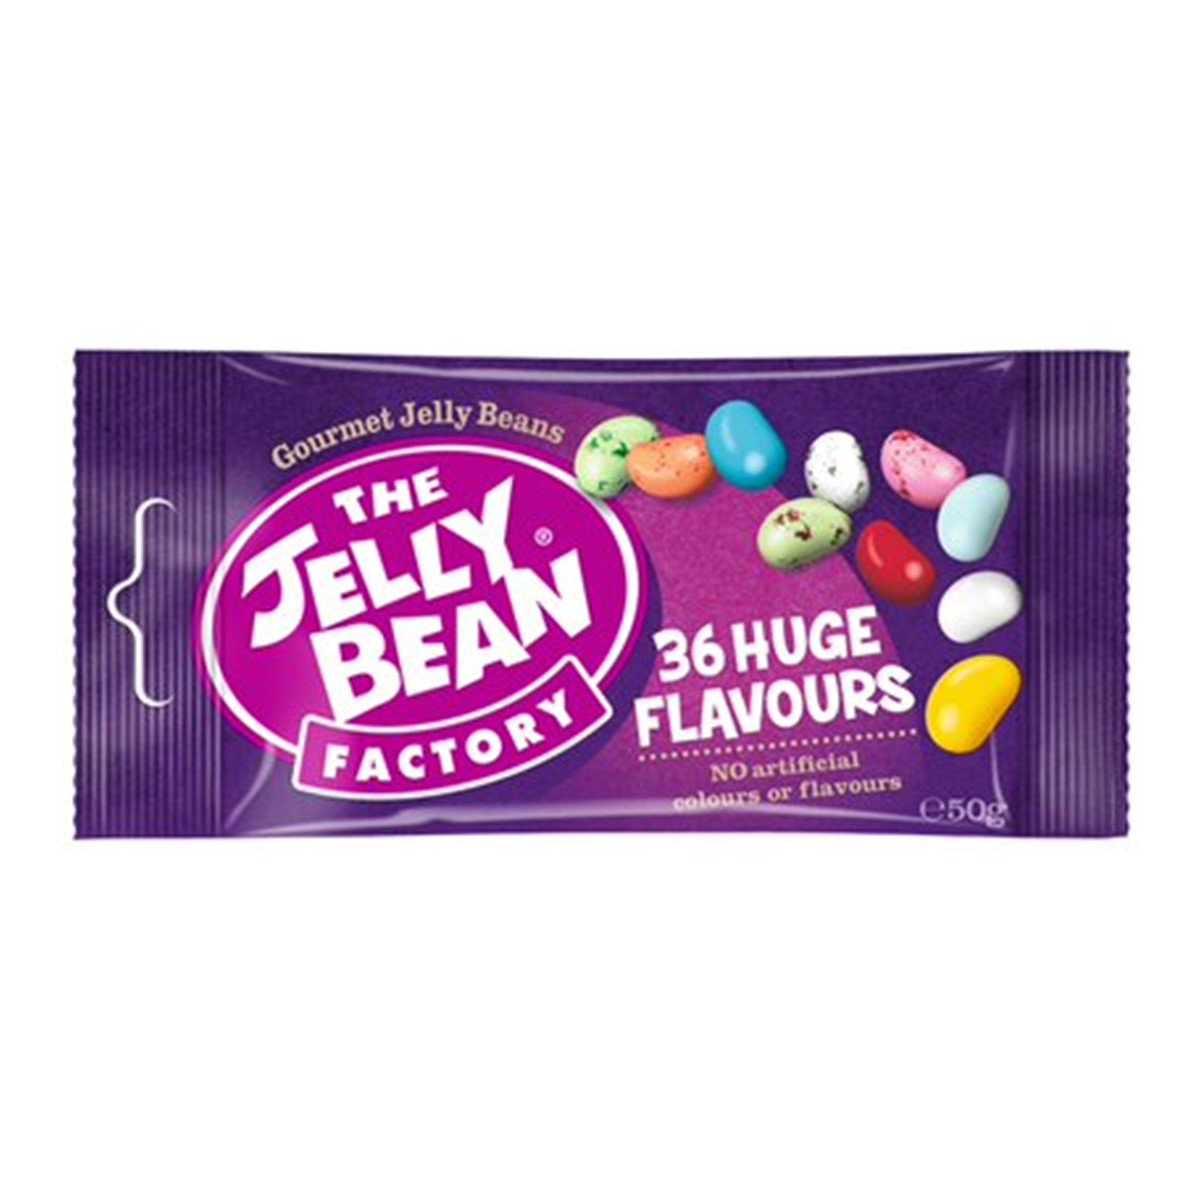 Jelly Bean Factory 36 Huge Flavours - 24x50g packets